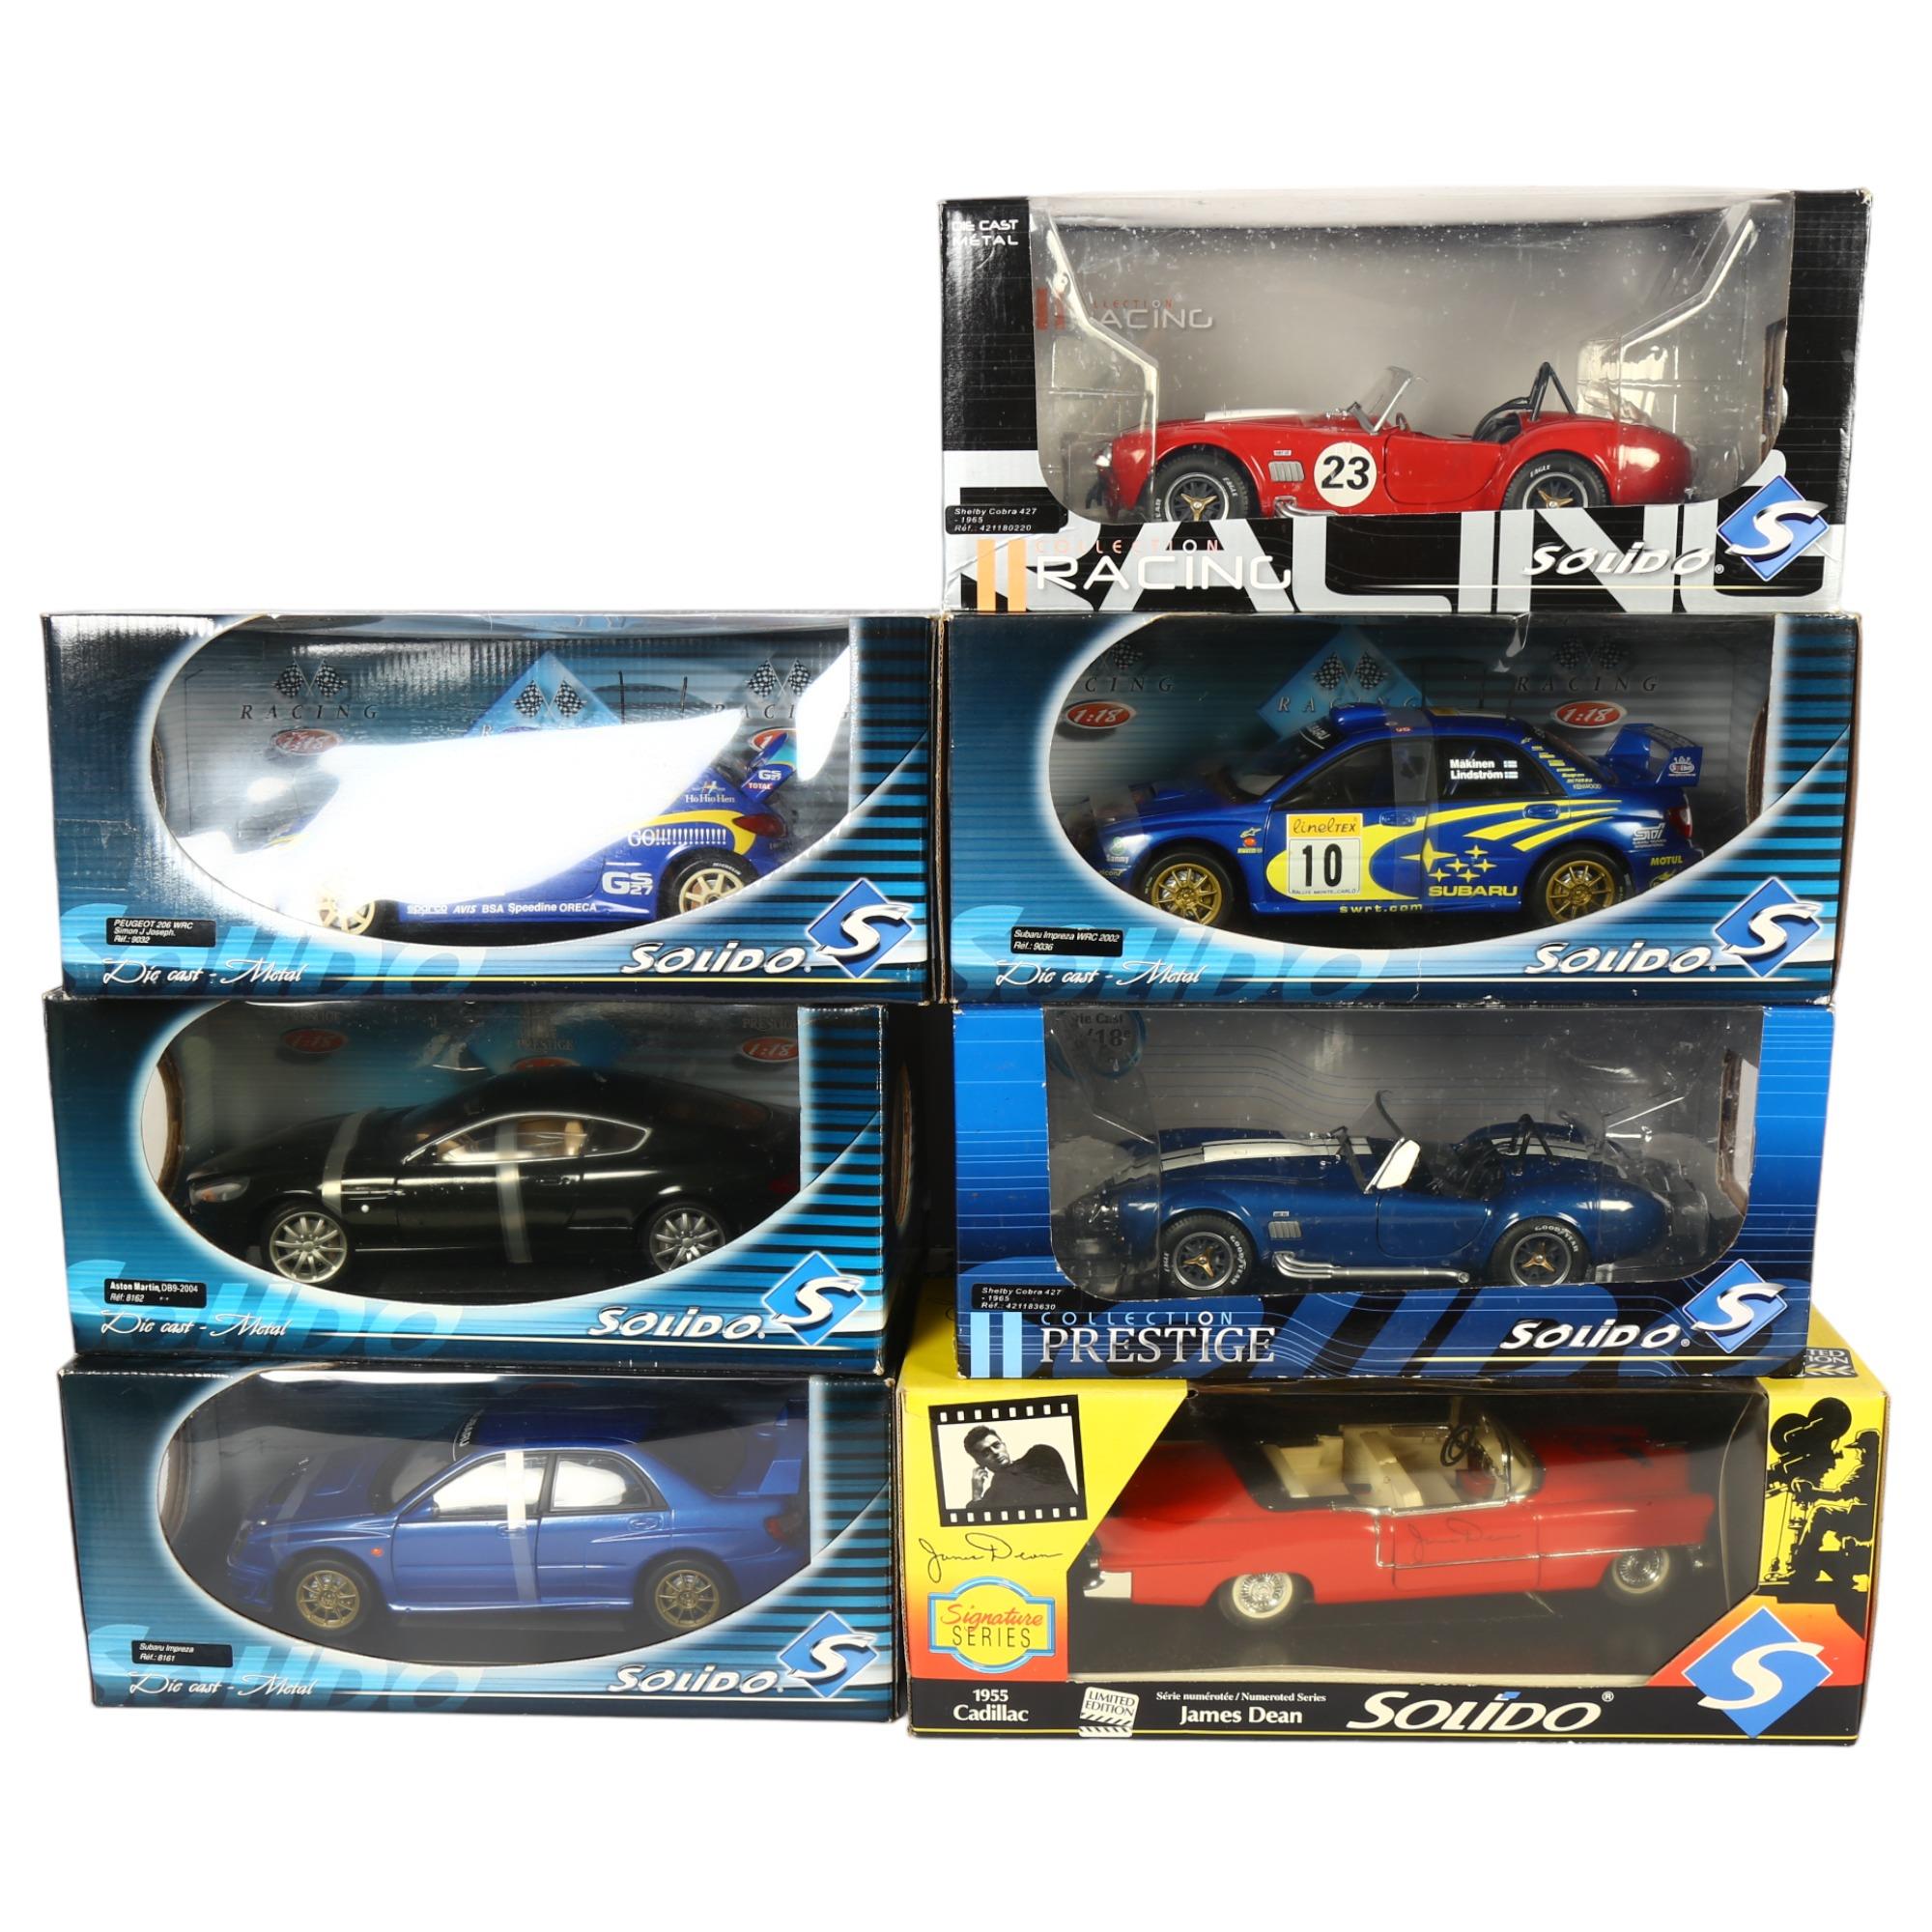 SOLIDO - a quantity of 1:18 scale diecast models, in original boxes, including Signature Series